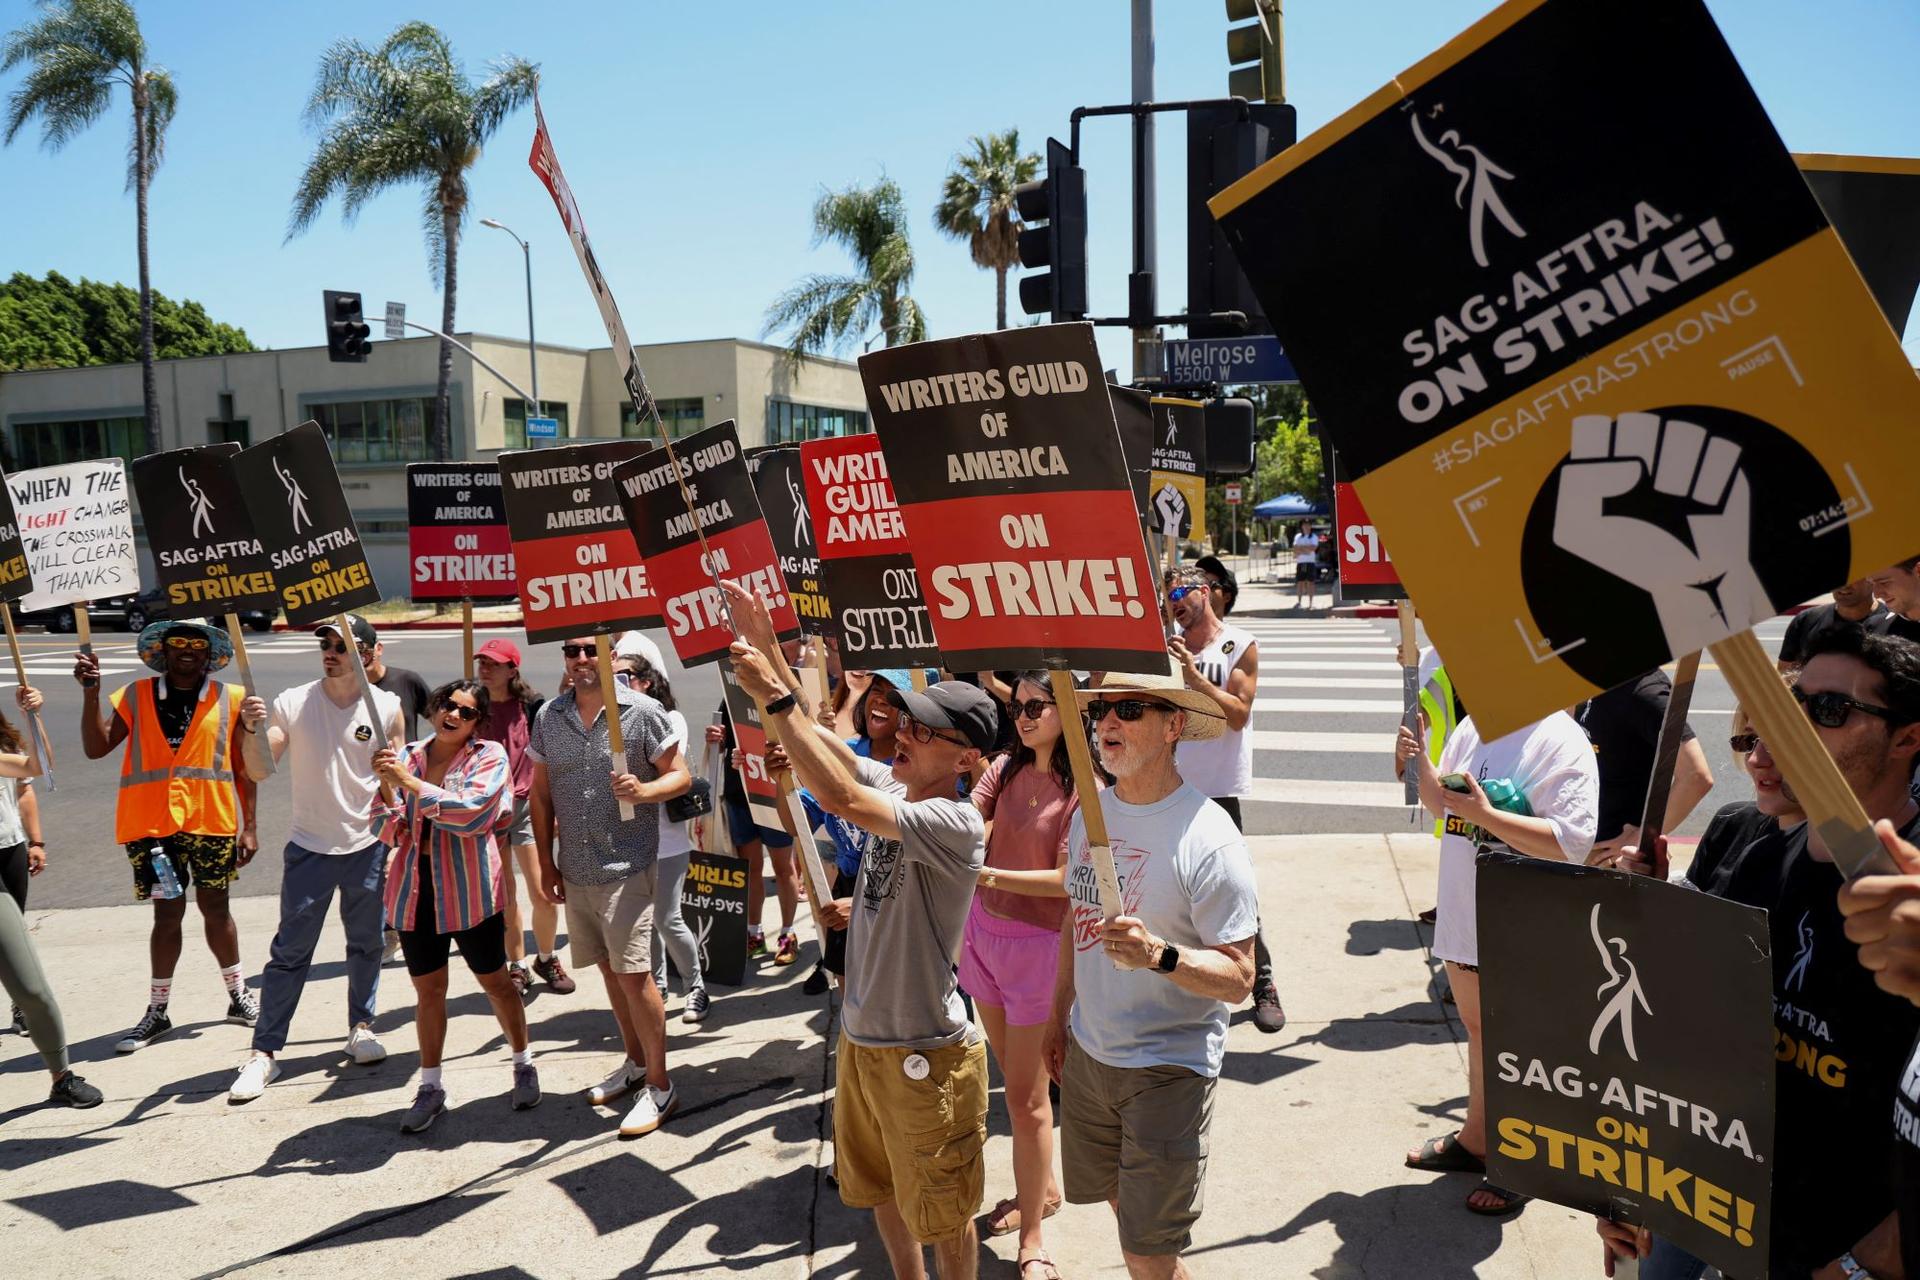 SAG-AFTRA actors and Writers Guild of America (WGA) writers walk the picket line during their ongoing strike outside Paramount Studios in Los Angeles on Aug. 2, 2023. (Mario Anzuoni/Reuters)